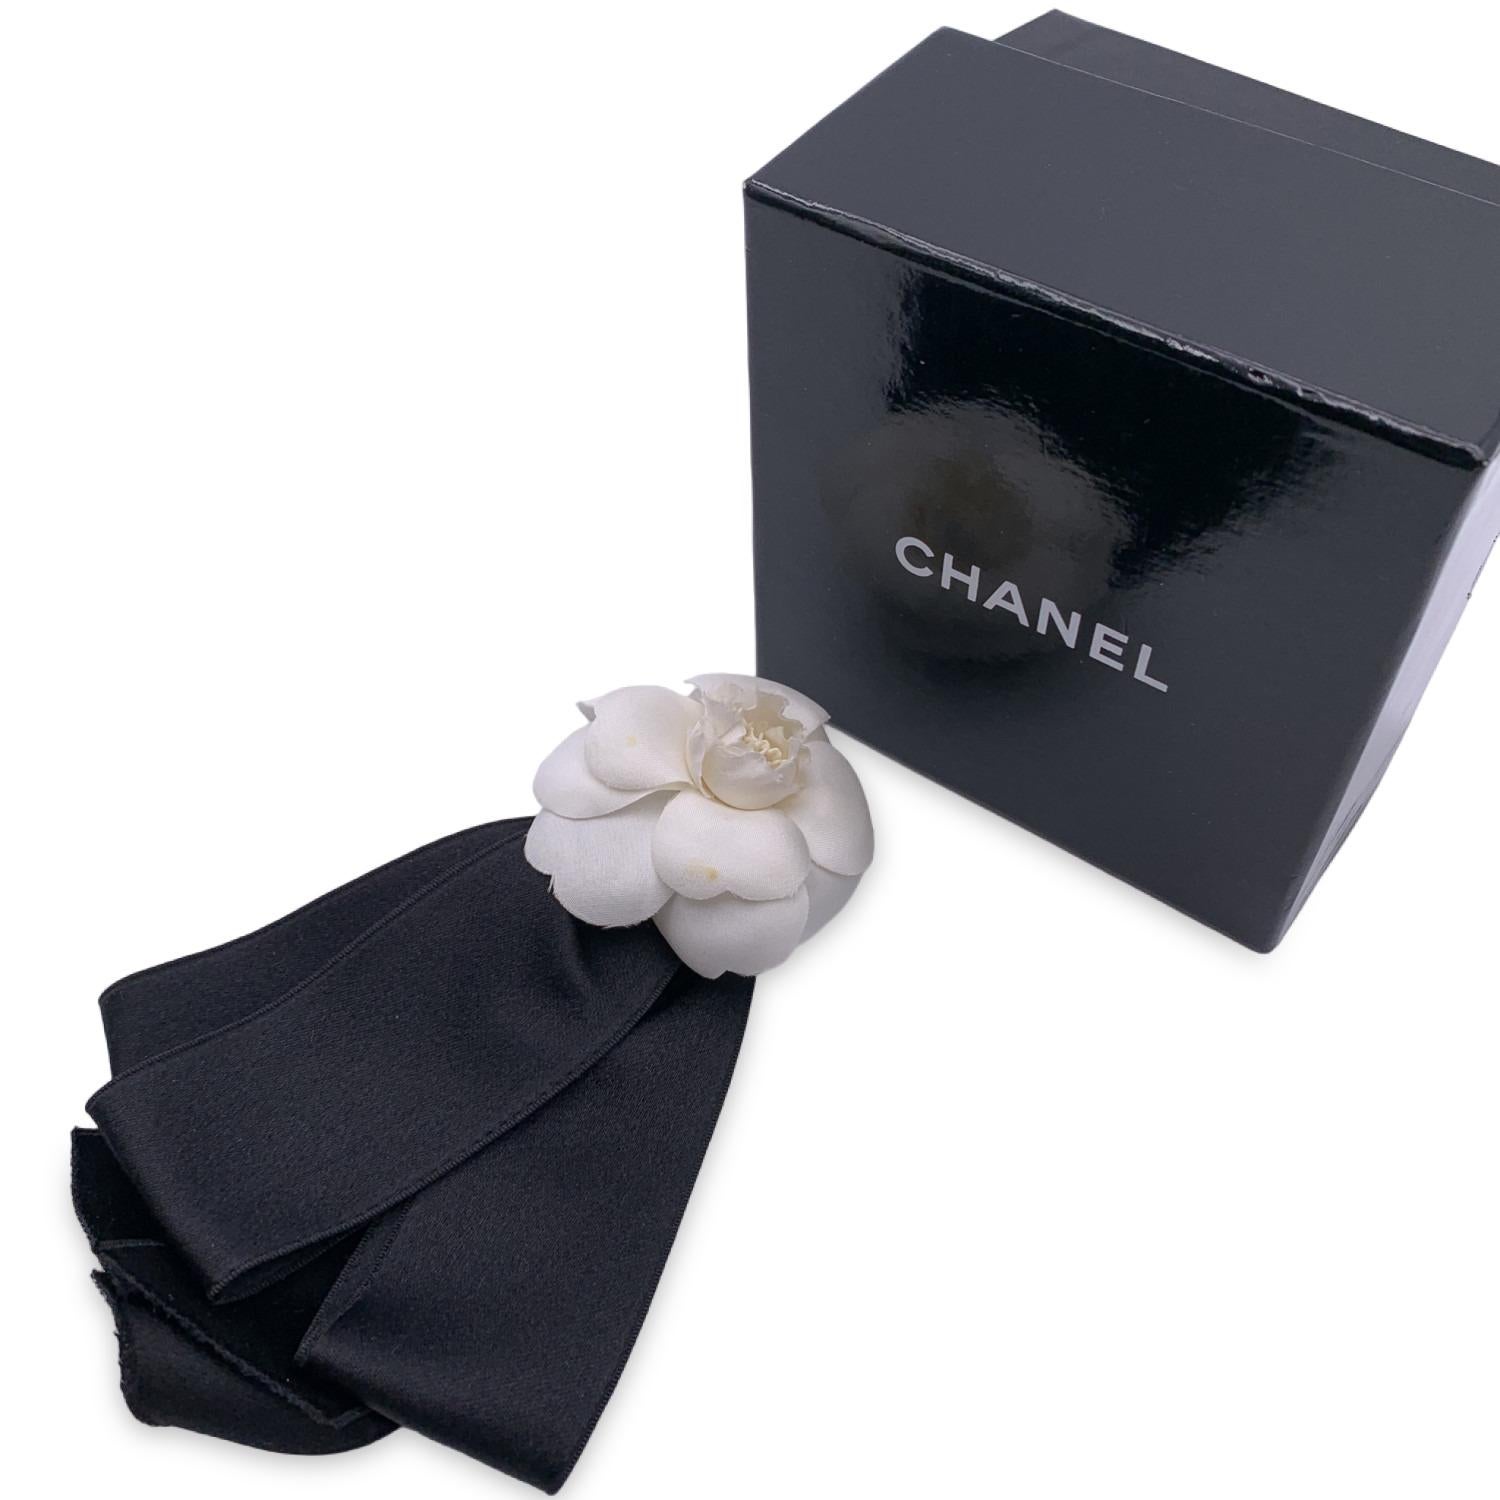 Lovely vintage Chanel brooch. White silk Camellia flower with black silk ribbons.  'Chanel CC Made in France' oval tab on the back. Flower width 2.5 inches - 6.4 cm. Heeight: 6.5 inches - 16.5 cm. Chanel box included.

B - VERY GOOD
A small brown